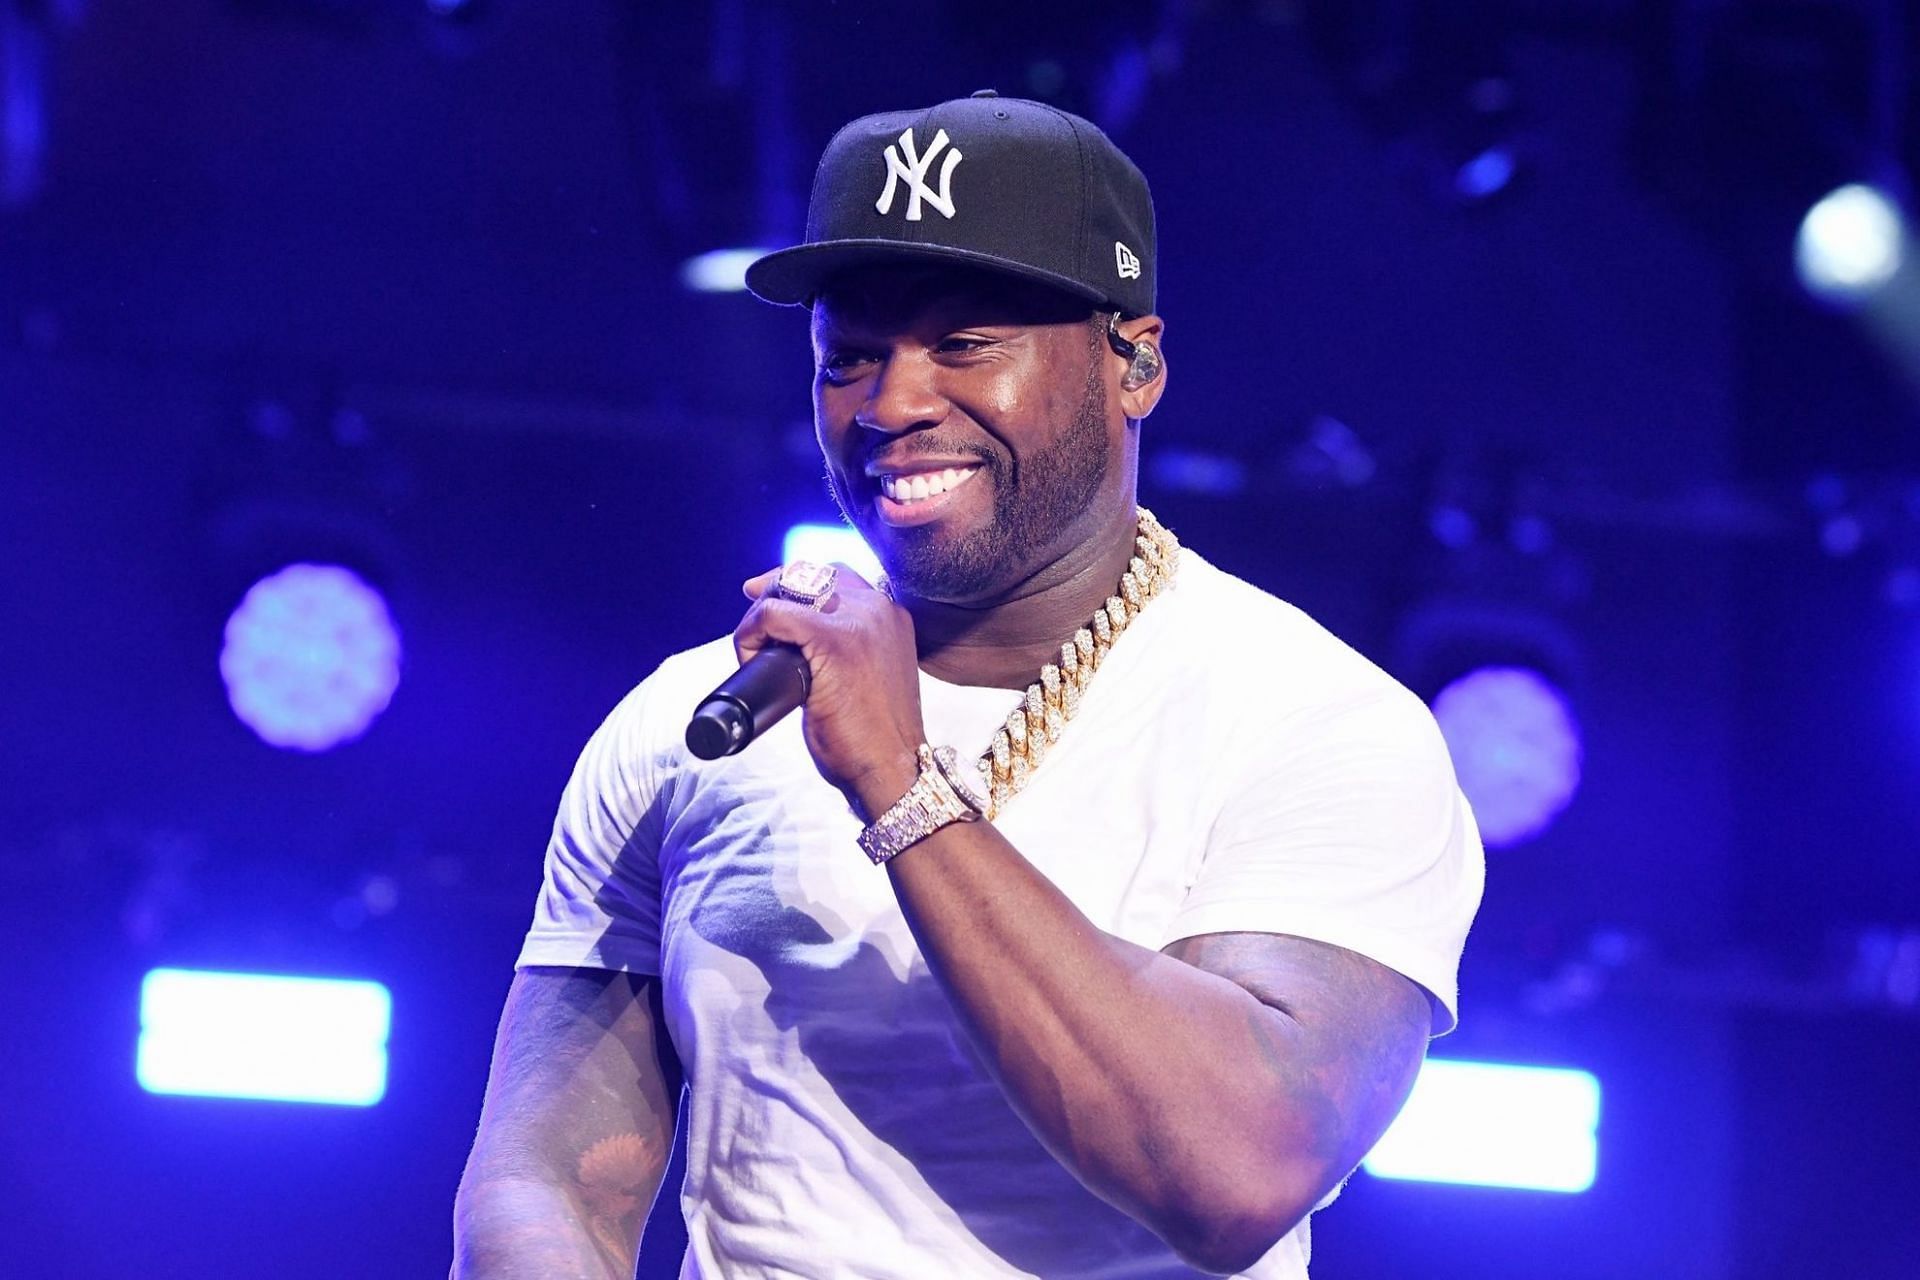 50 Cent will perform in Armenia in July (Image via Getty Images)